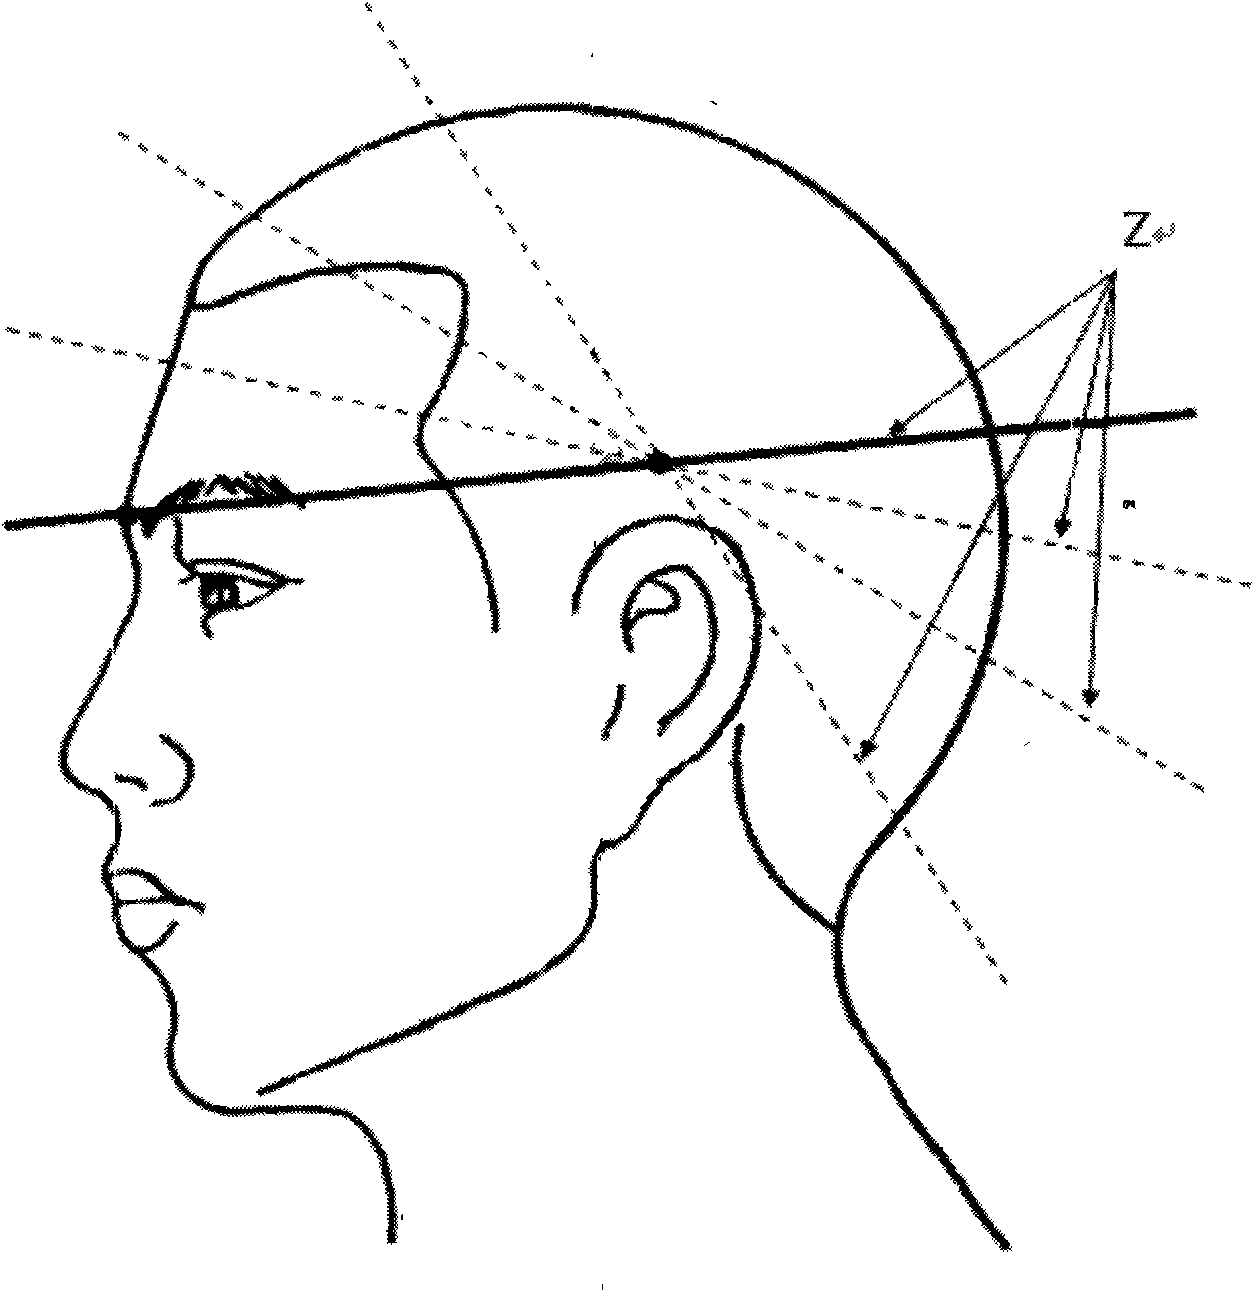 Transcranial magnetic therapeutic instrument for computer diseases